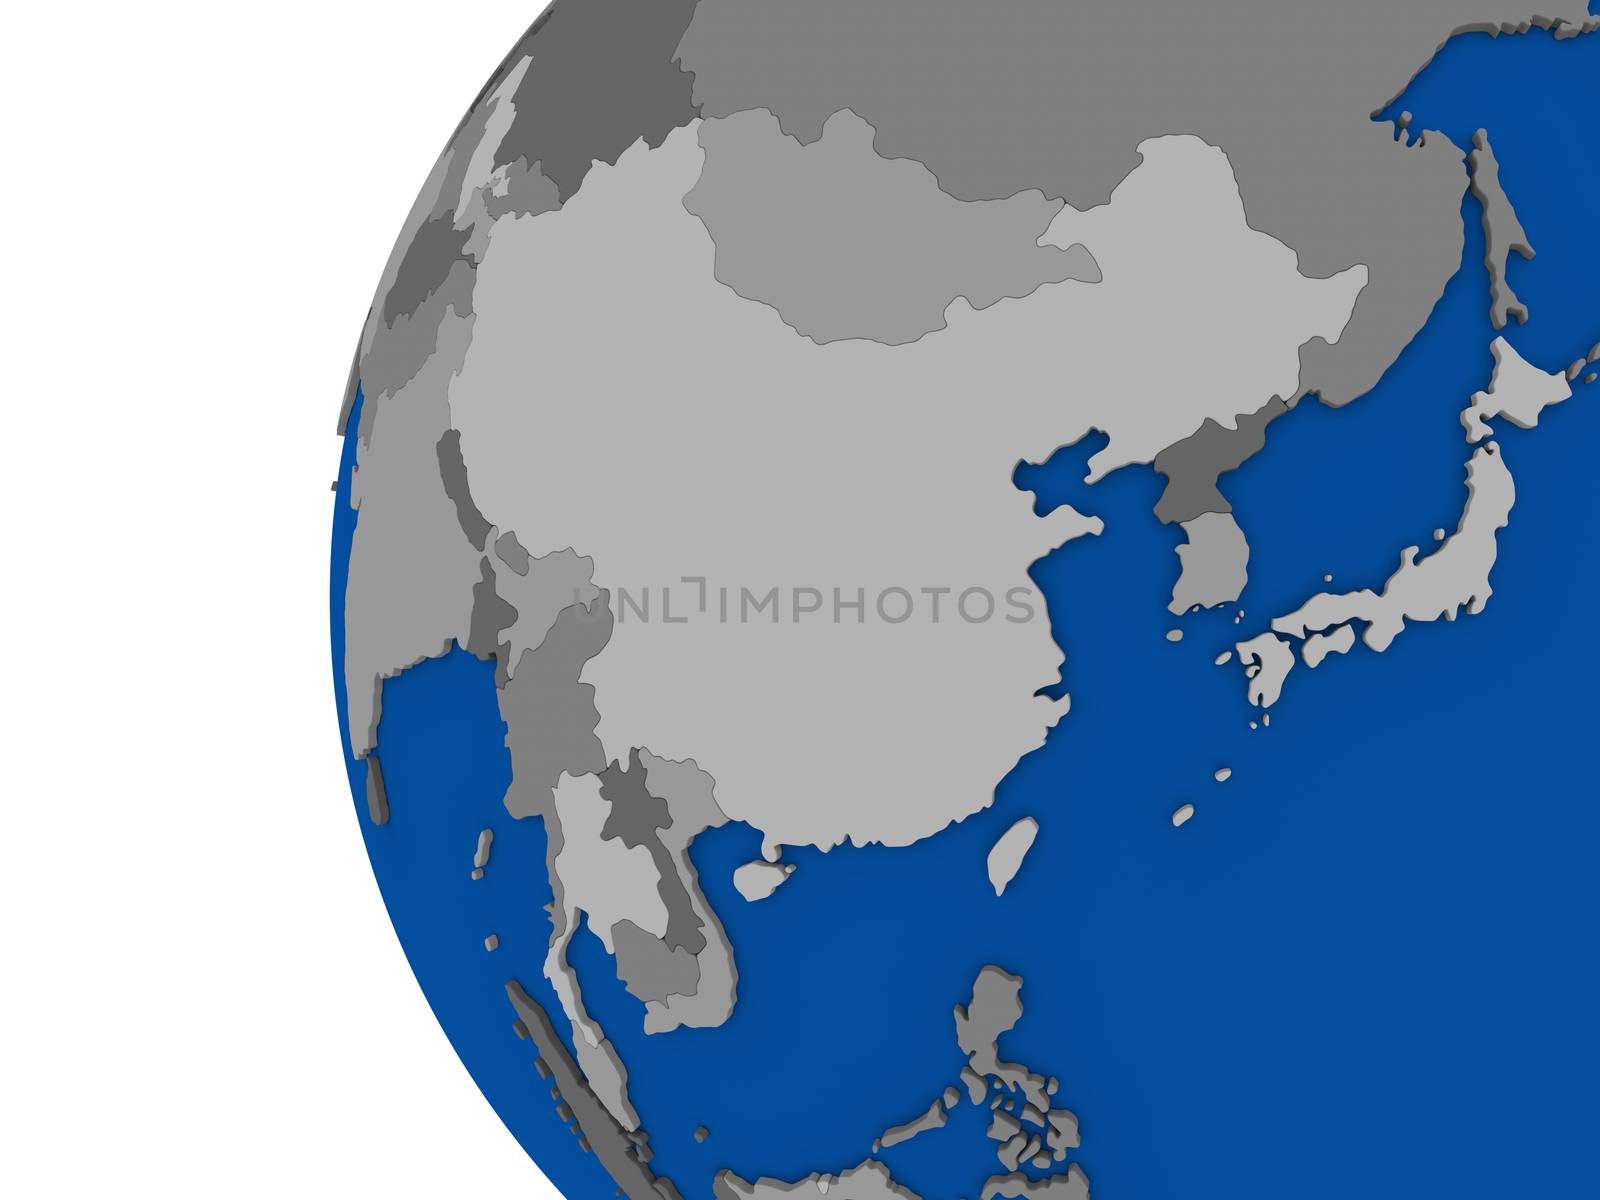 east Asia region on political globe by Harvepino